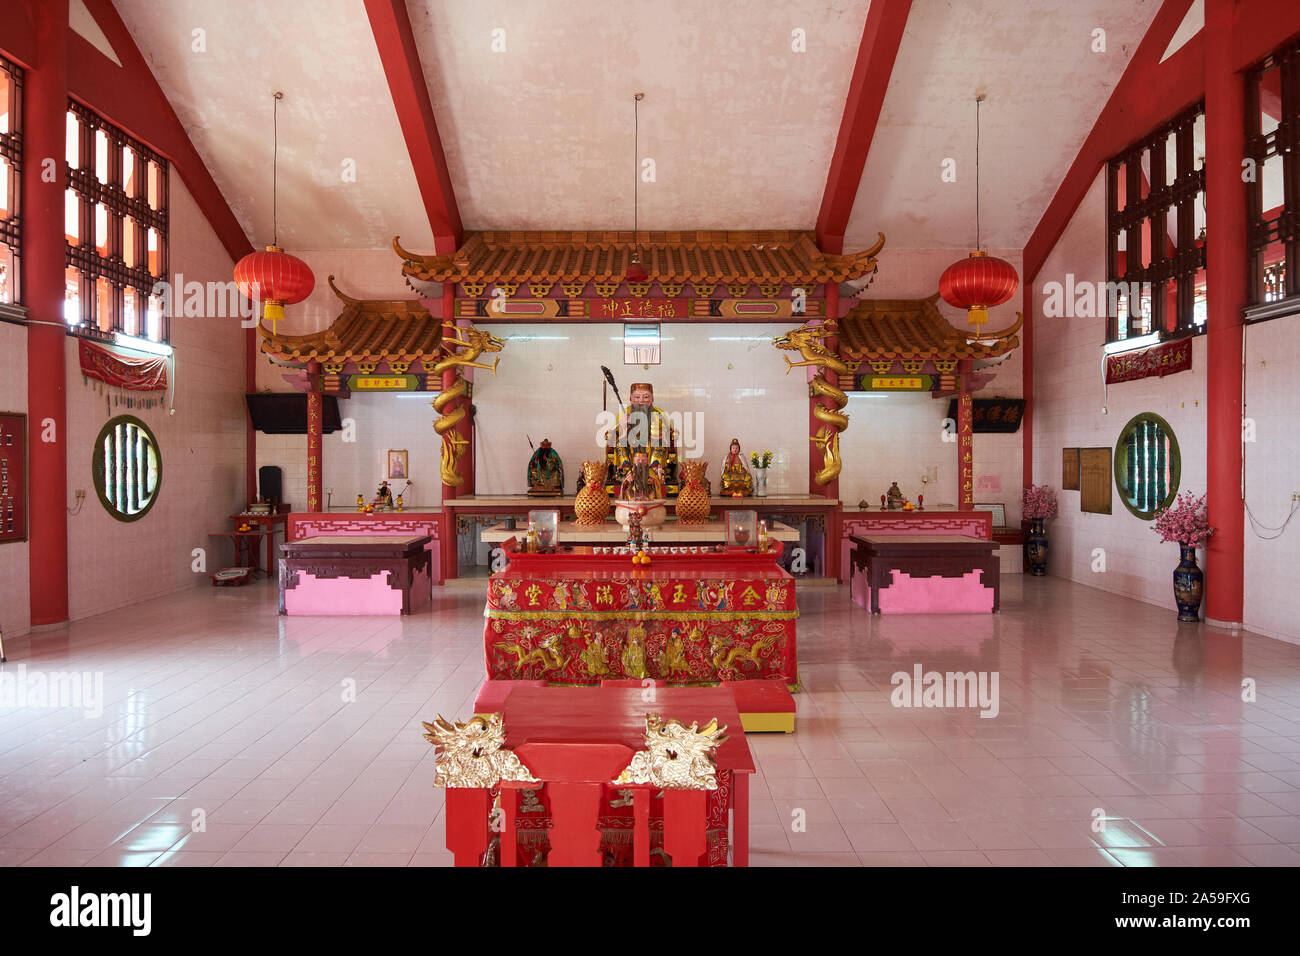 The interior altar area of the  Chinese temple, Lie Sheng Gong, in the town of Pekan. In Pahang, Malaysia. Stock Photo